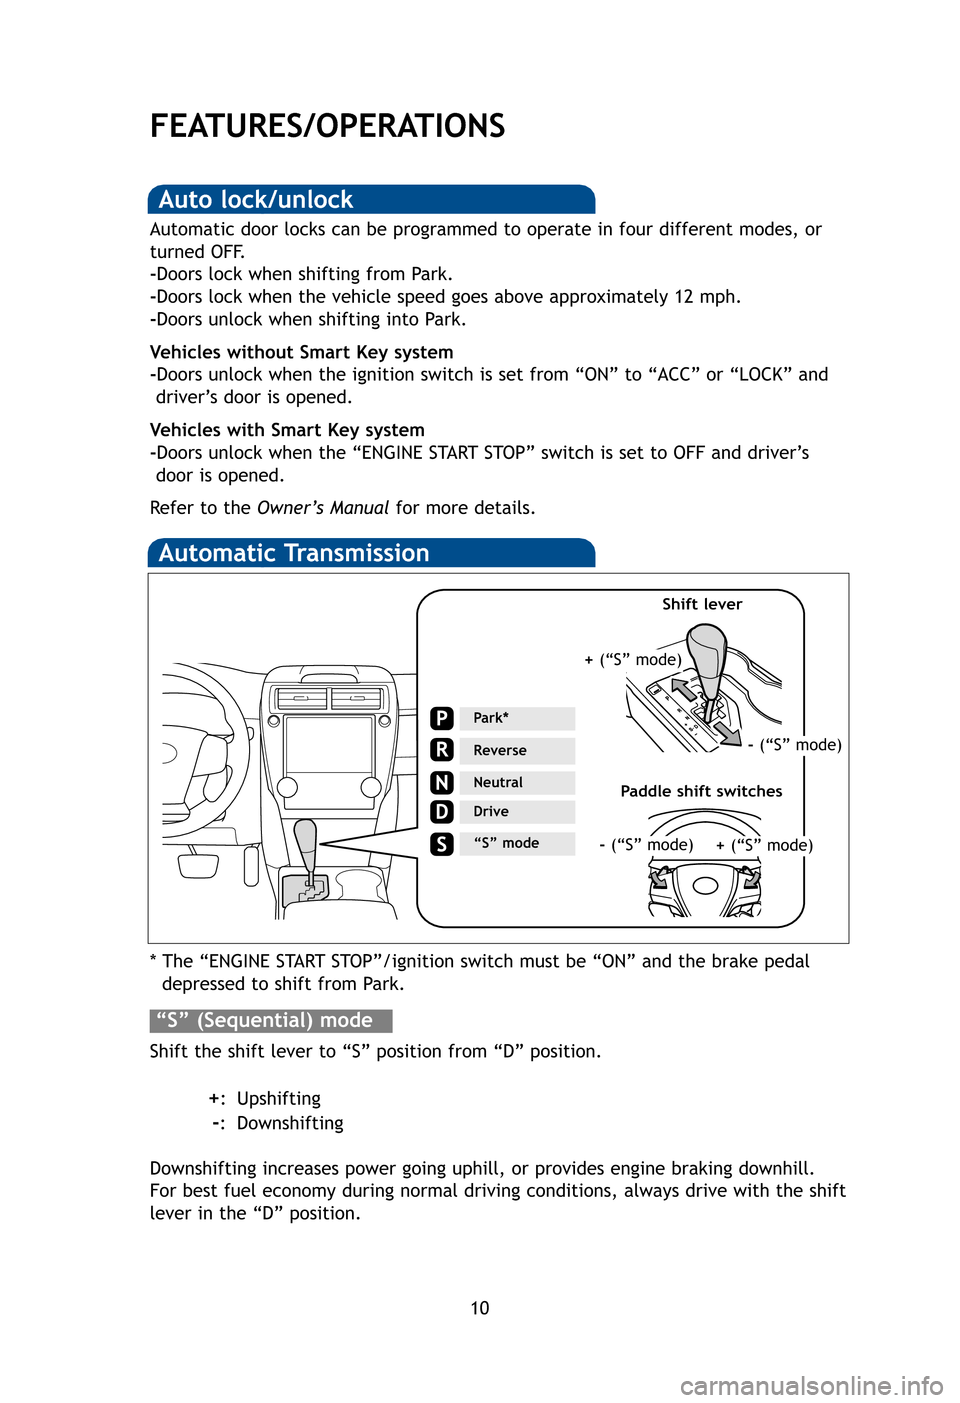 TOYOTA CAMRY 2012 XV50 / 9.G Quick Reference Guide 10
FEATURES/OPERATIONS
Automatic Transmission
* The “ENGINE START STOP”/ignition switch must be “ON” and the brake pedaldepressed to shift from Park.
Shift the shift lever to “S” position 